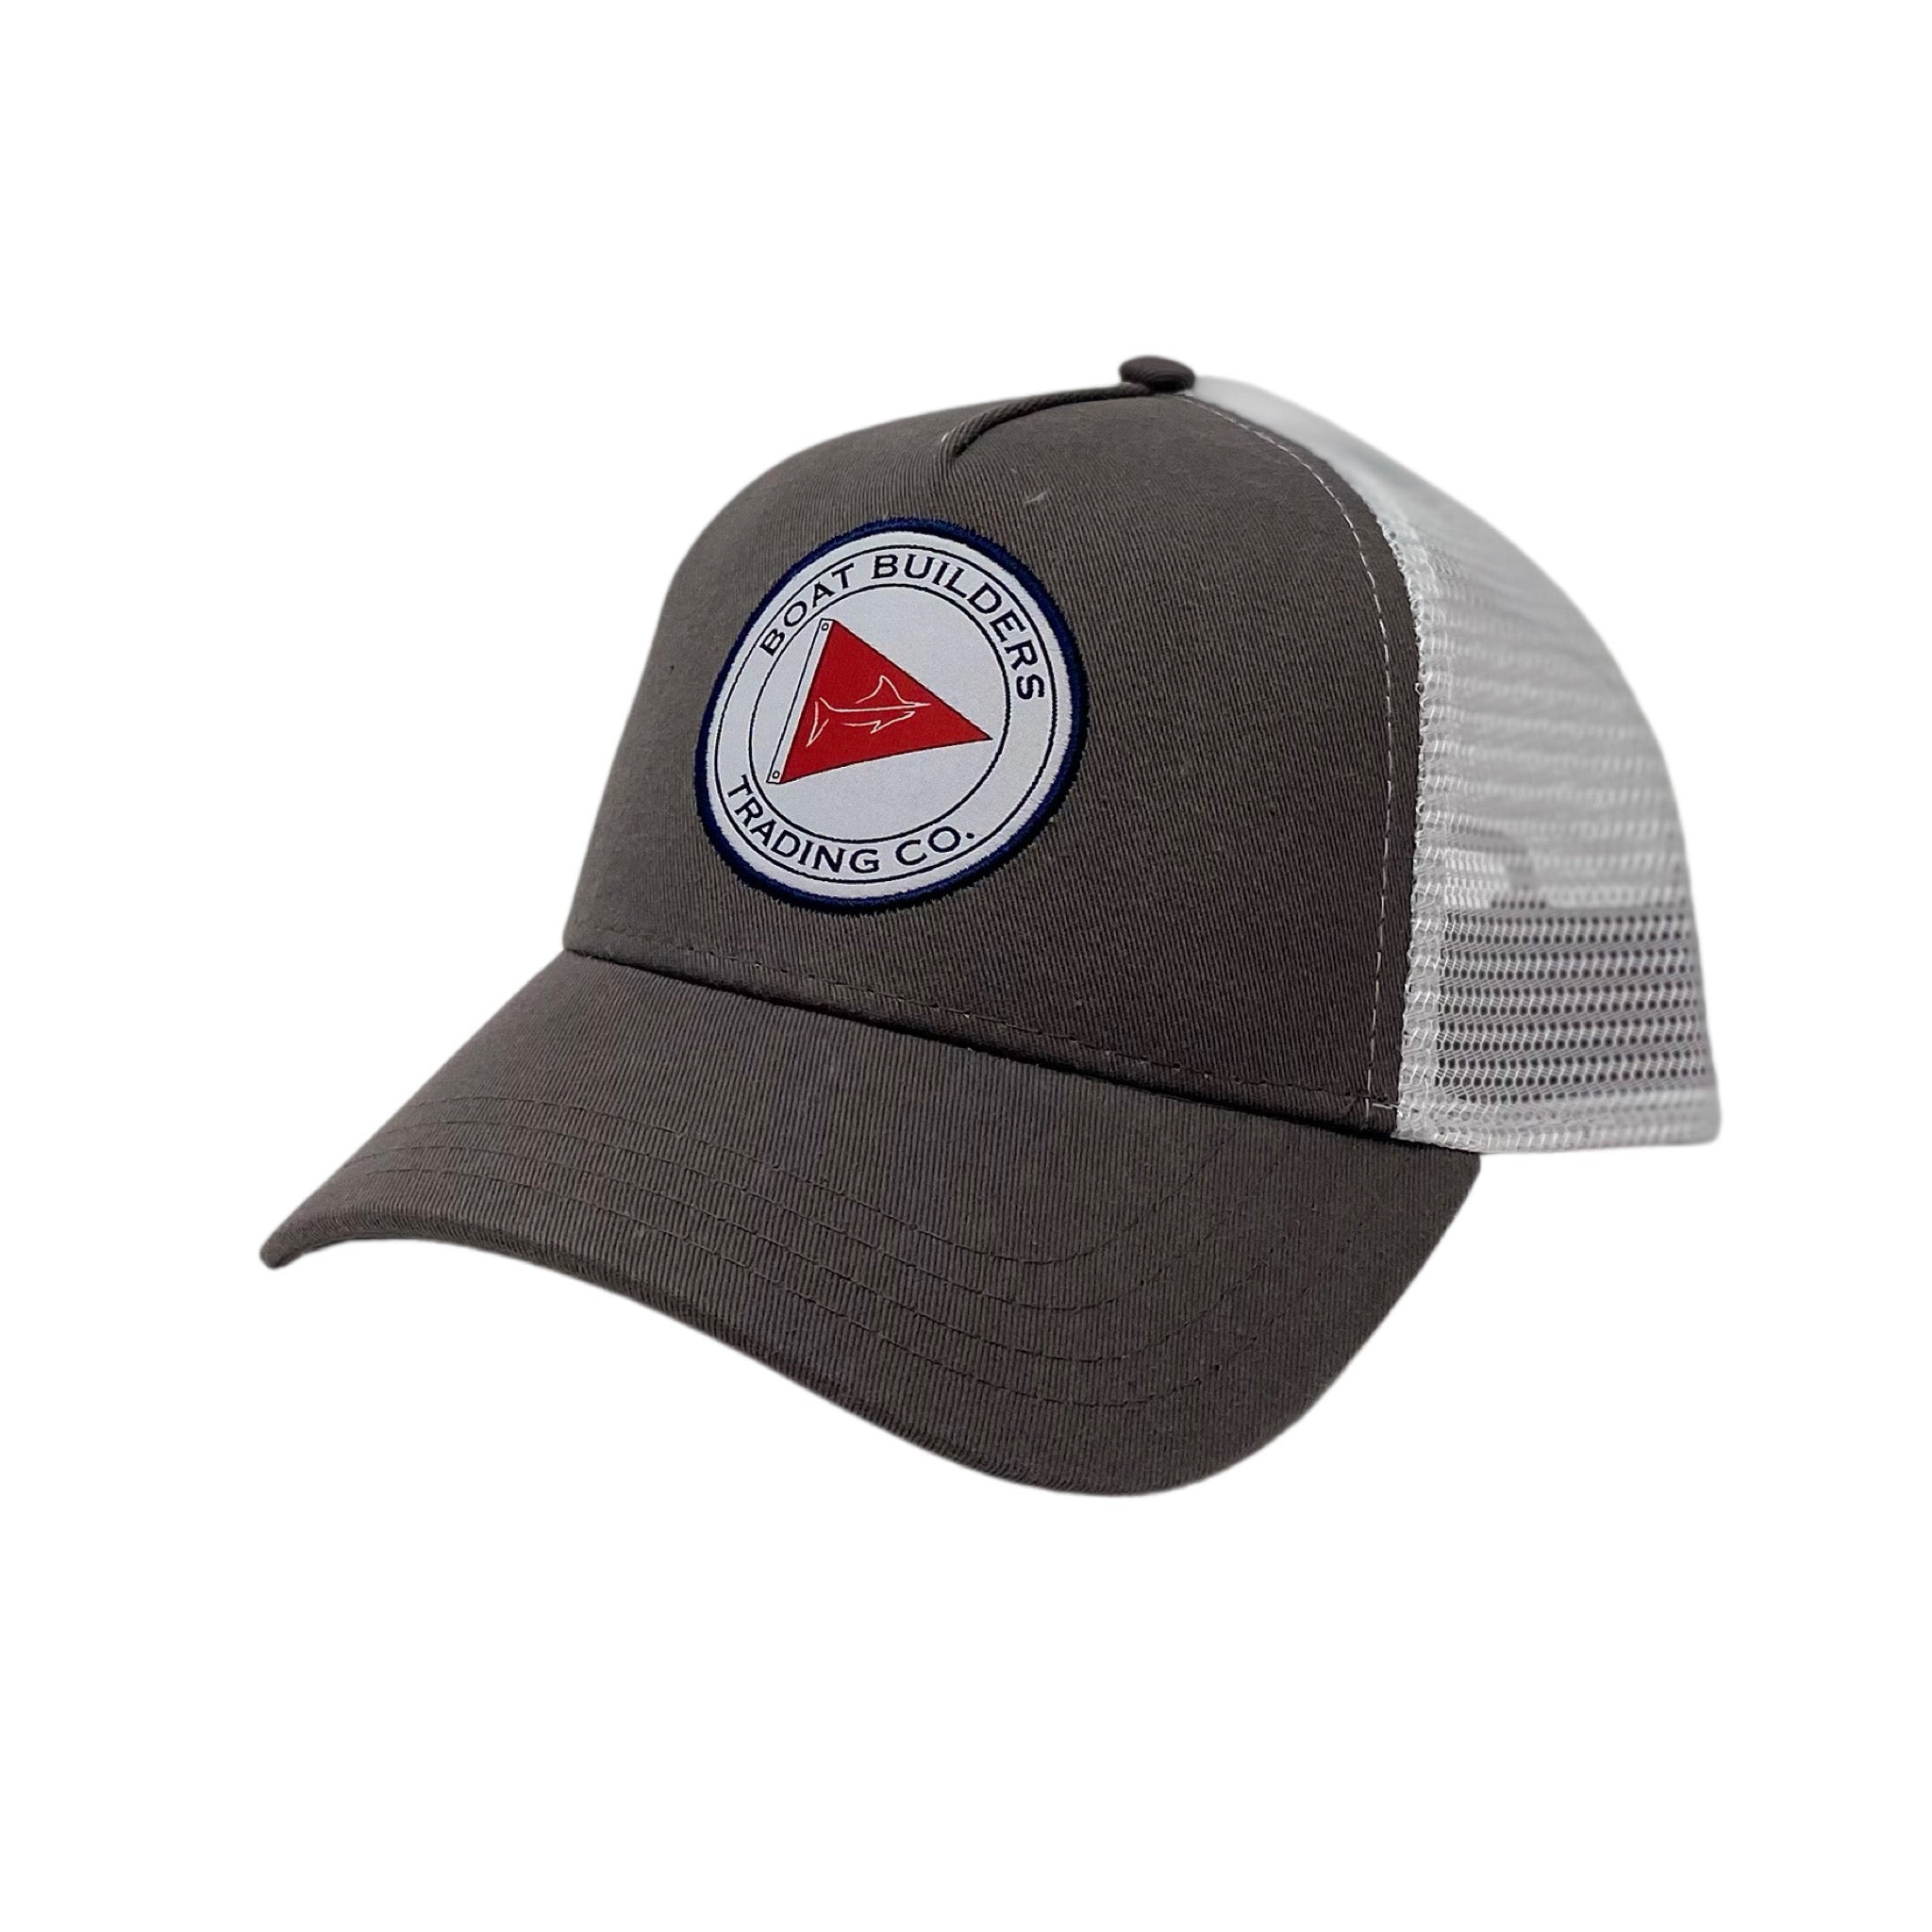 Boat Builders Trading Co Structured Trucker Hat - Limited Edition Logo Patch